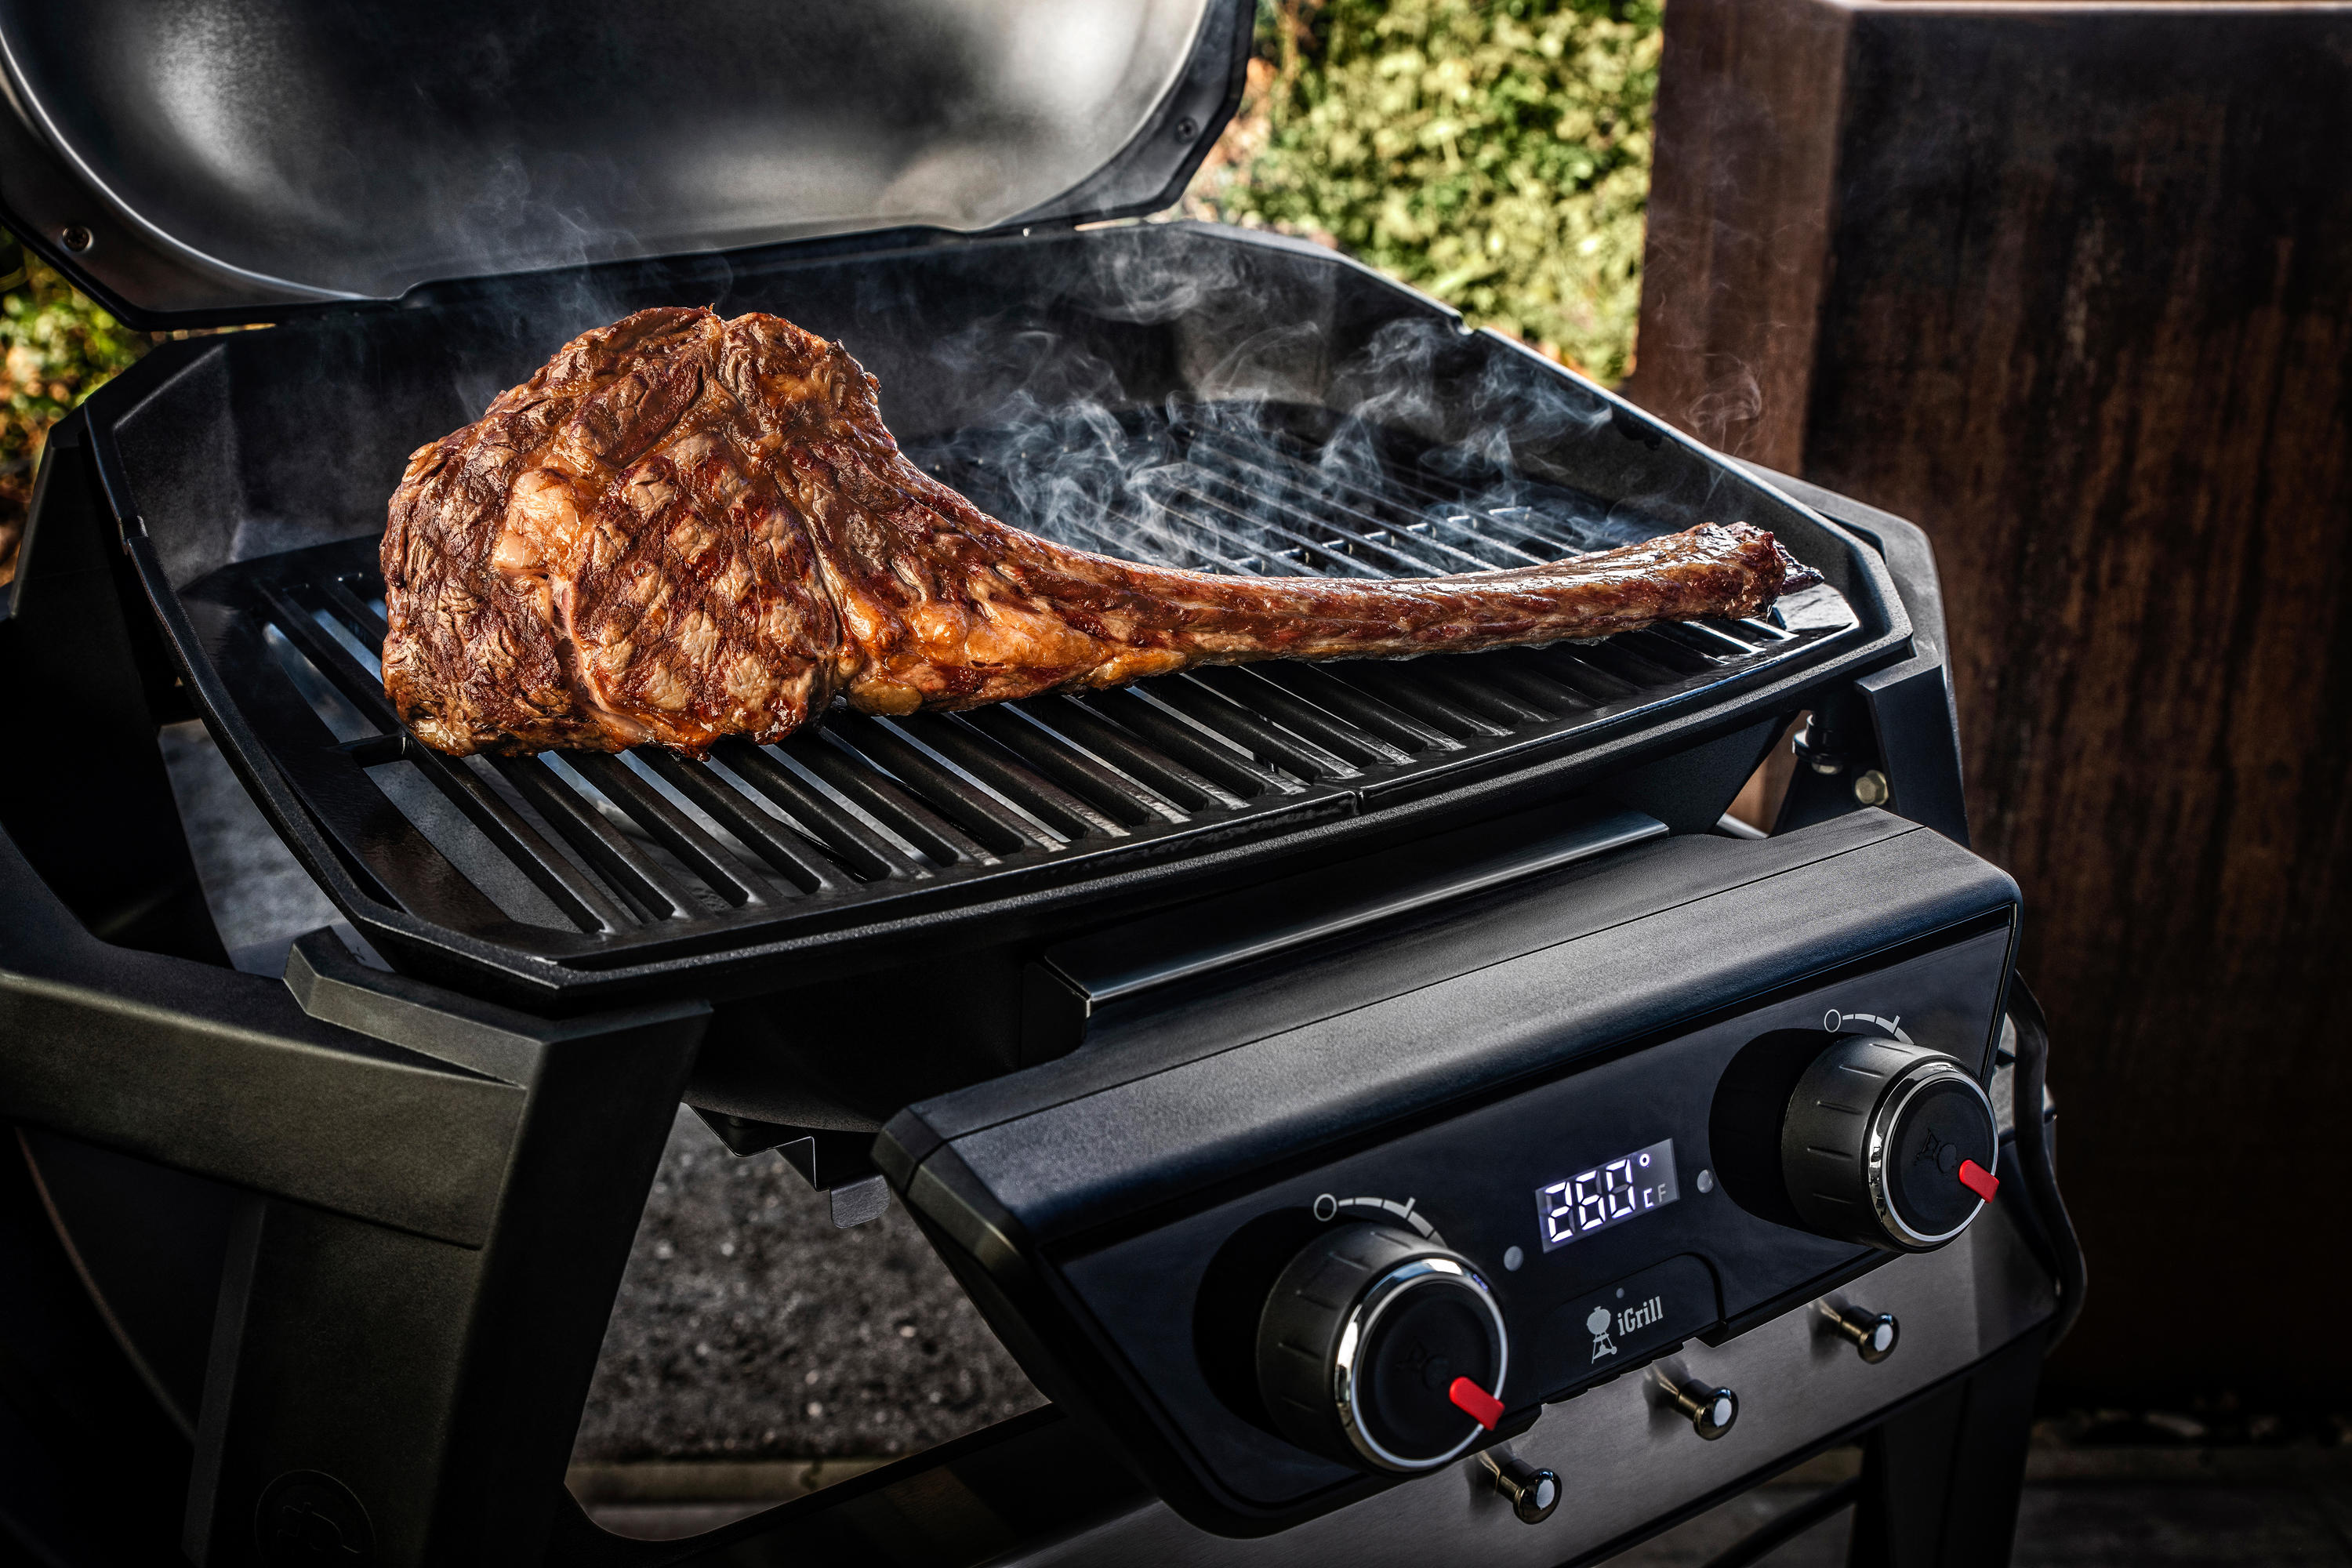 PULSE 1000 - Barbecues from Weber | Architonic